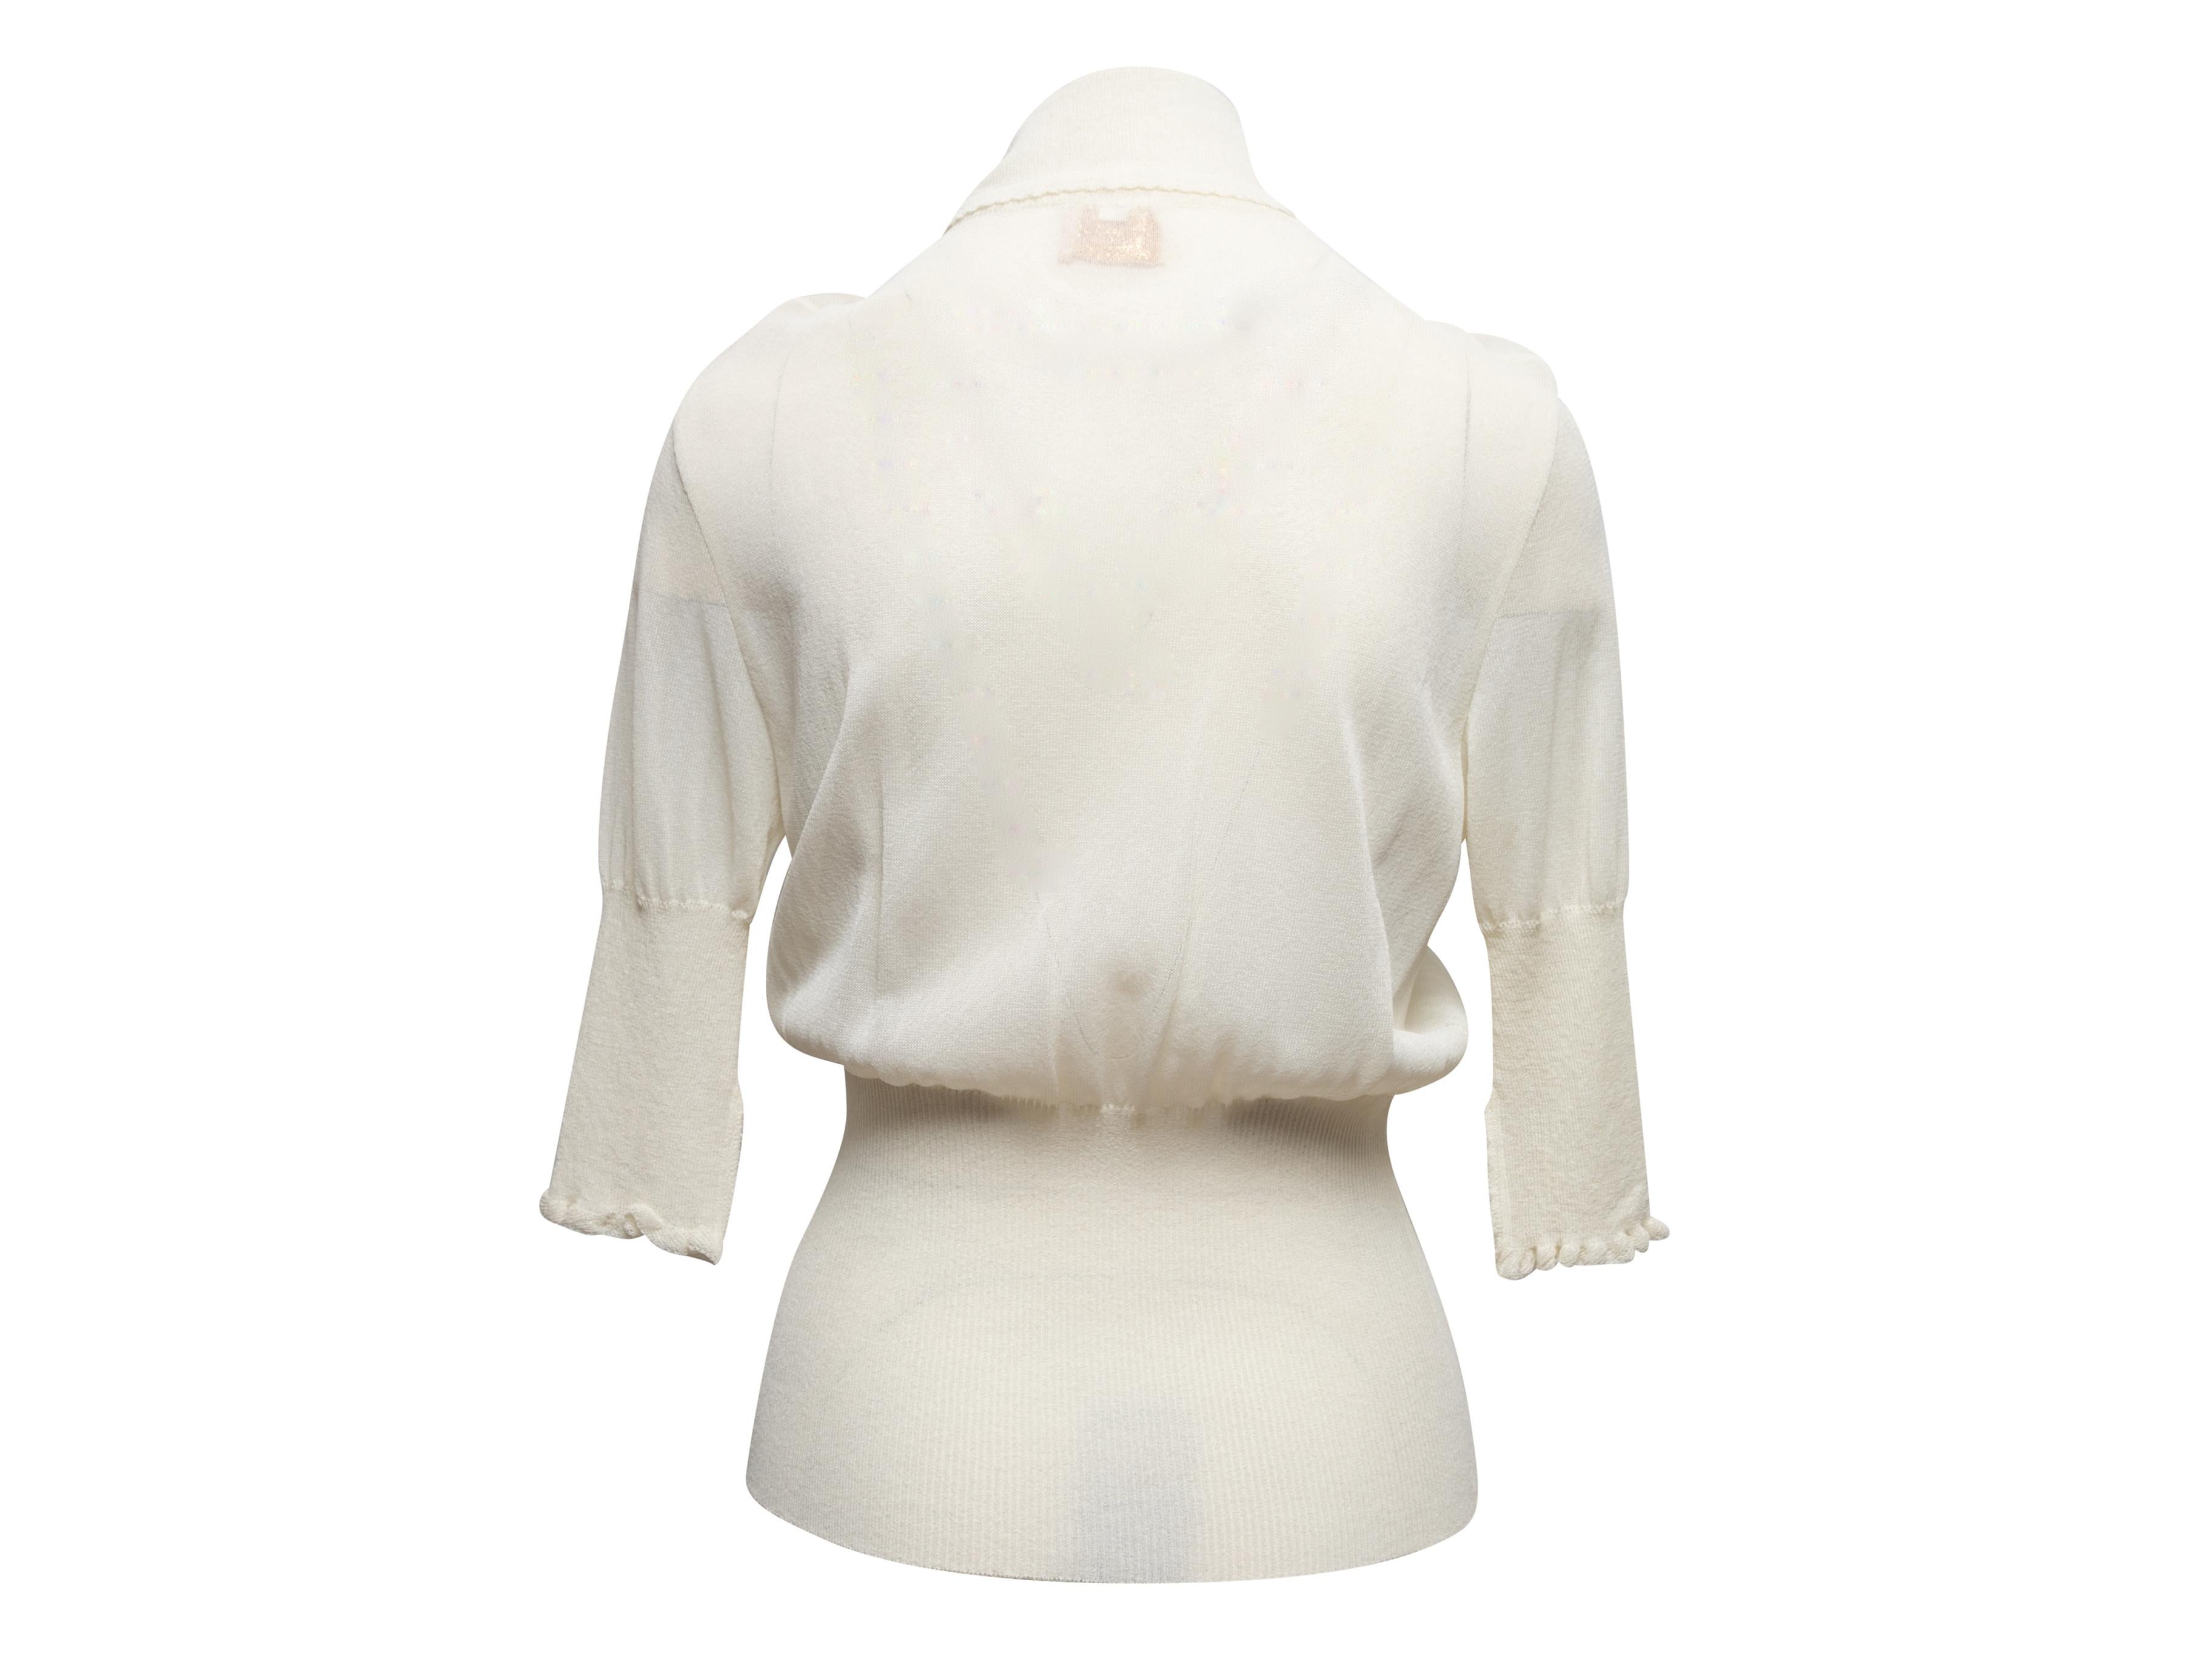 Vintage white ruffle-trimmed knit top by Vivienne Westwood. Short sleeves. Button closures at bust. V-neck. 28